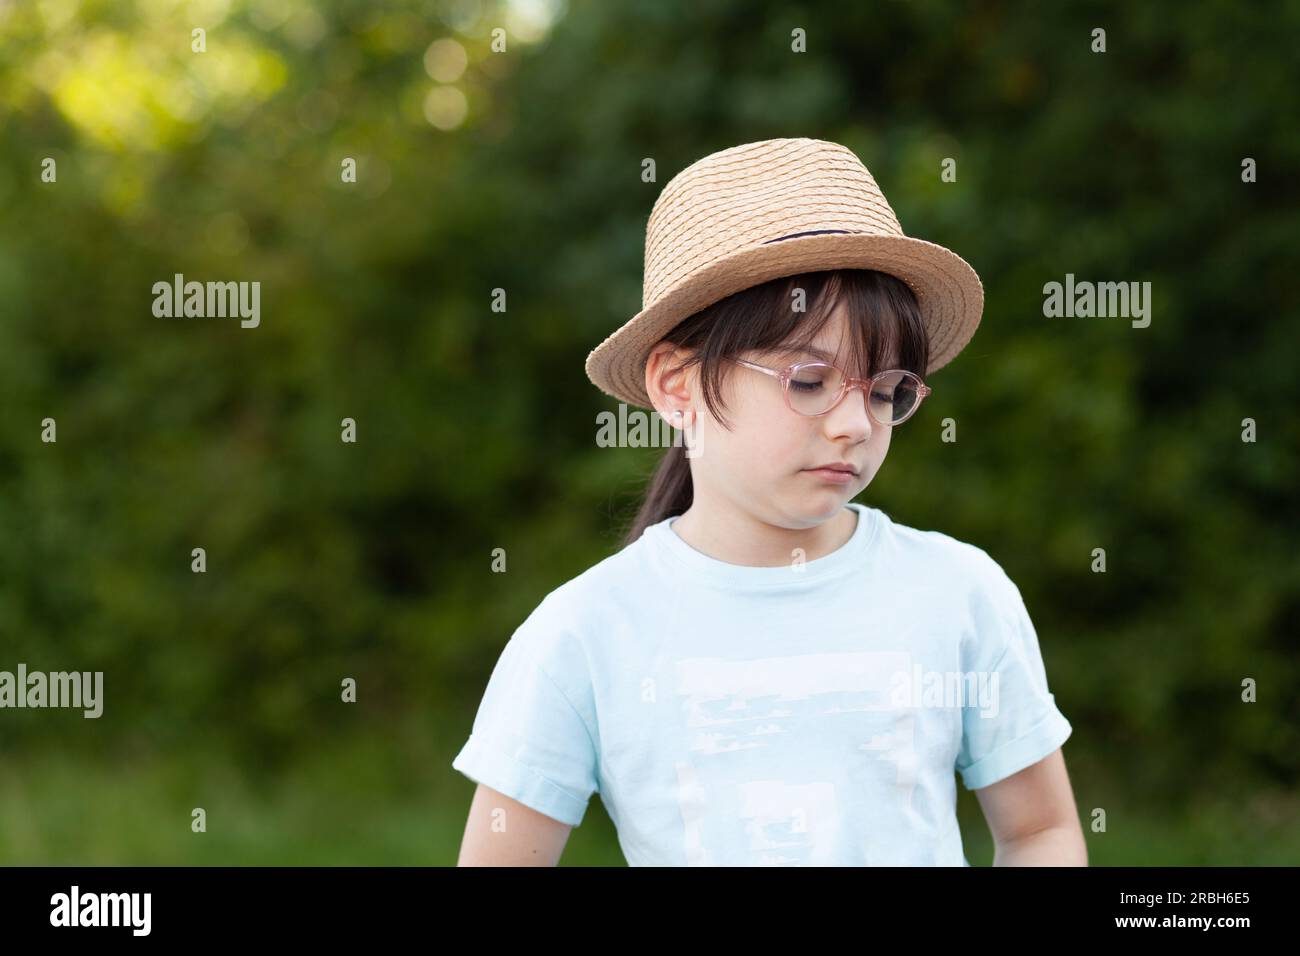 Cute little girl wearing a straw hat and glasses in the park Stock Photo